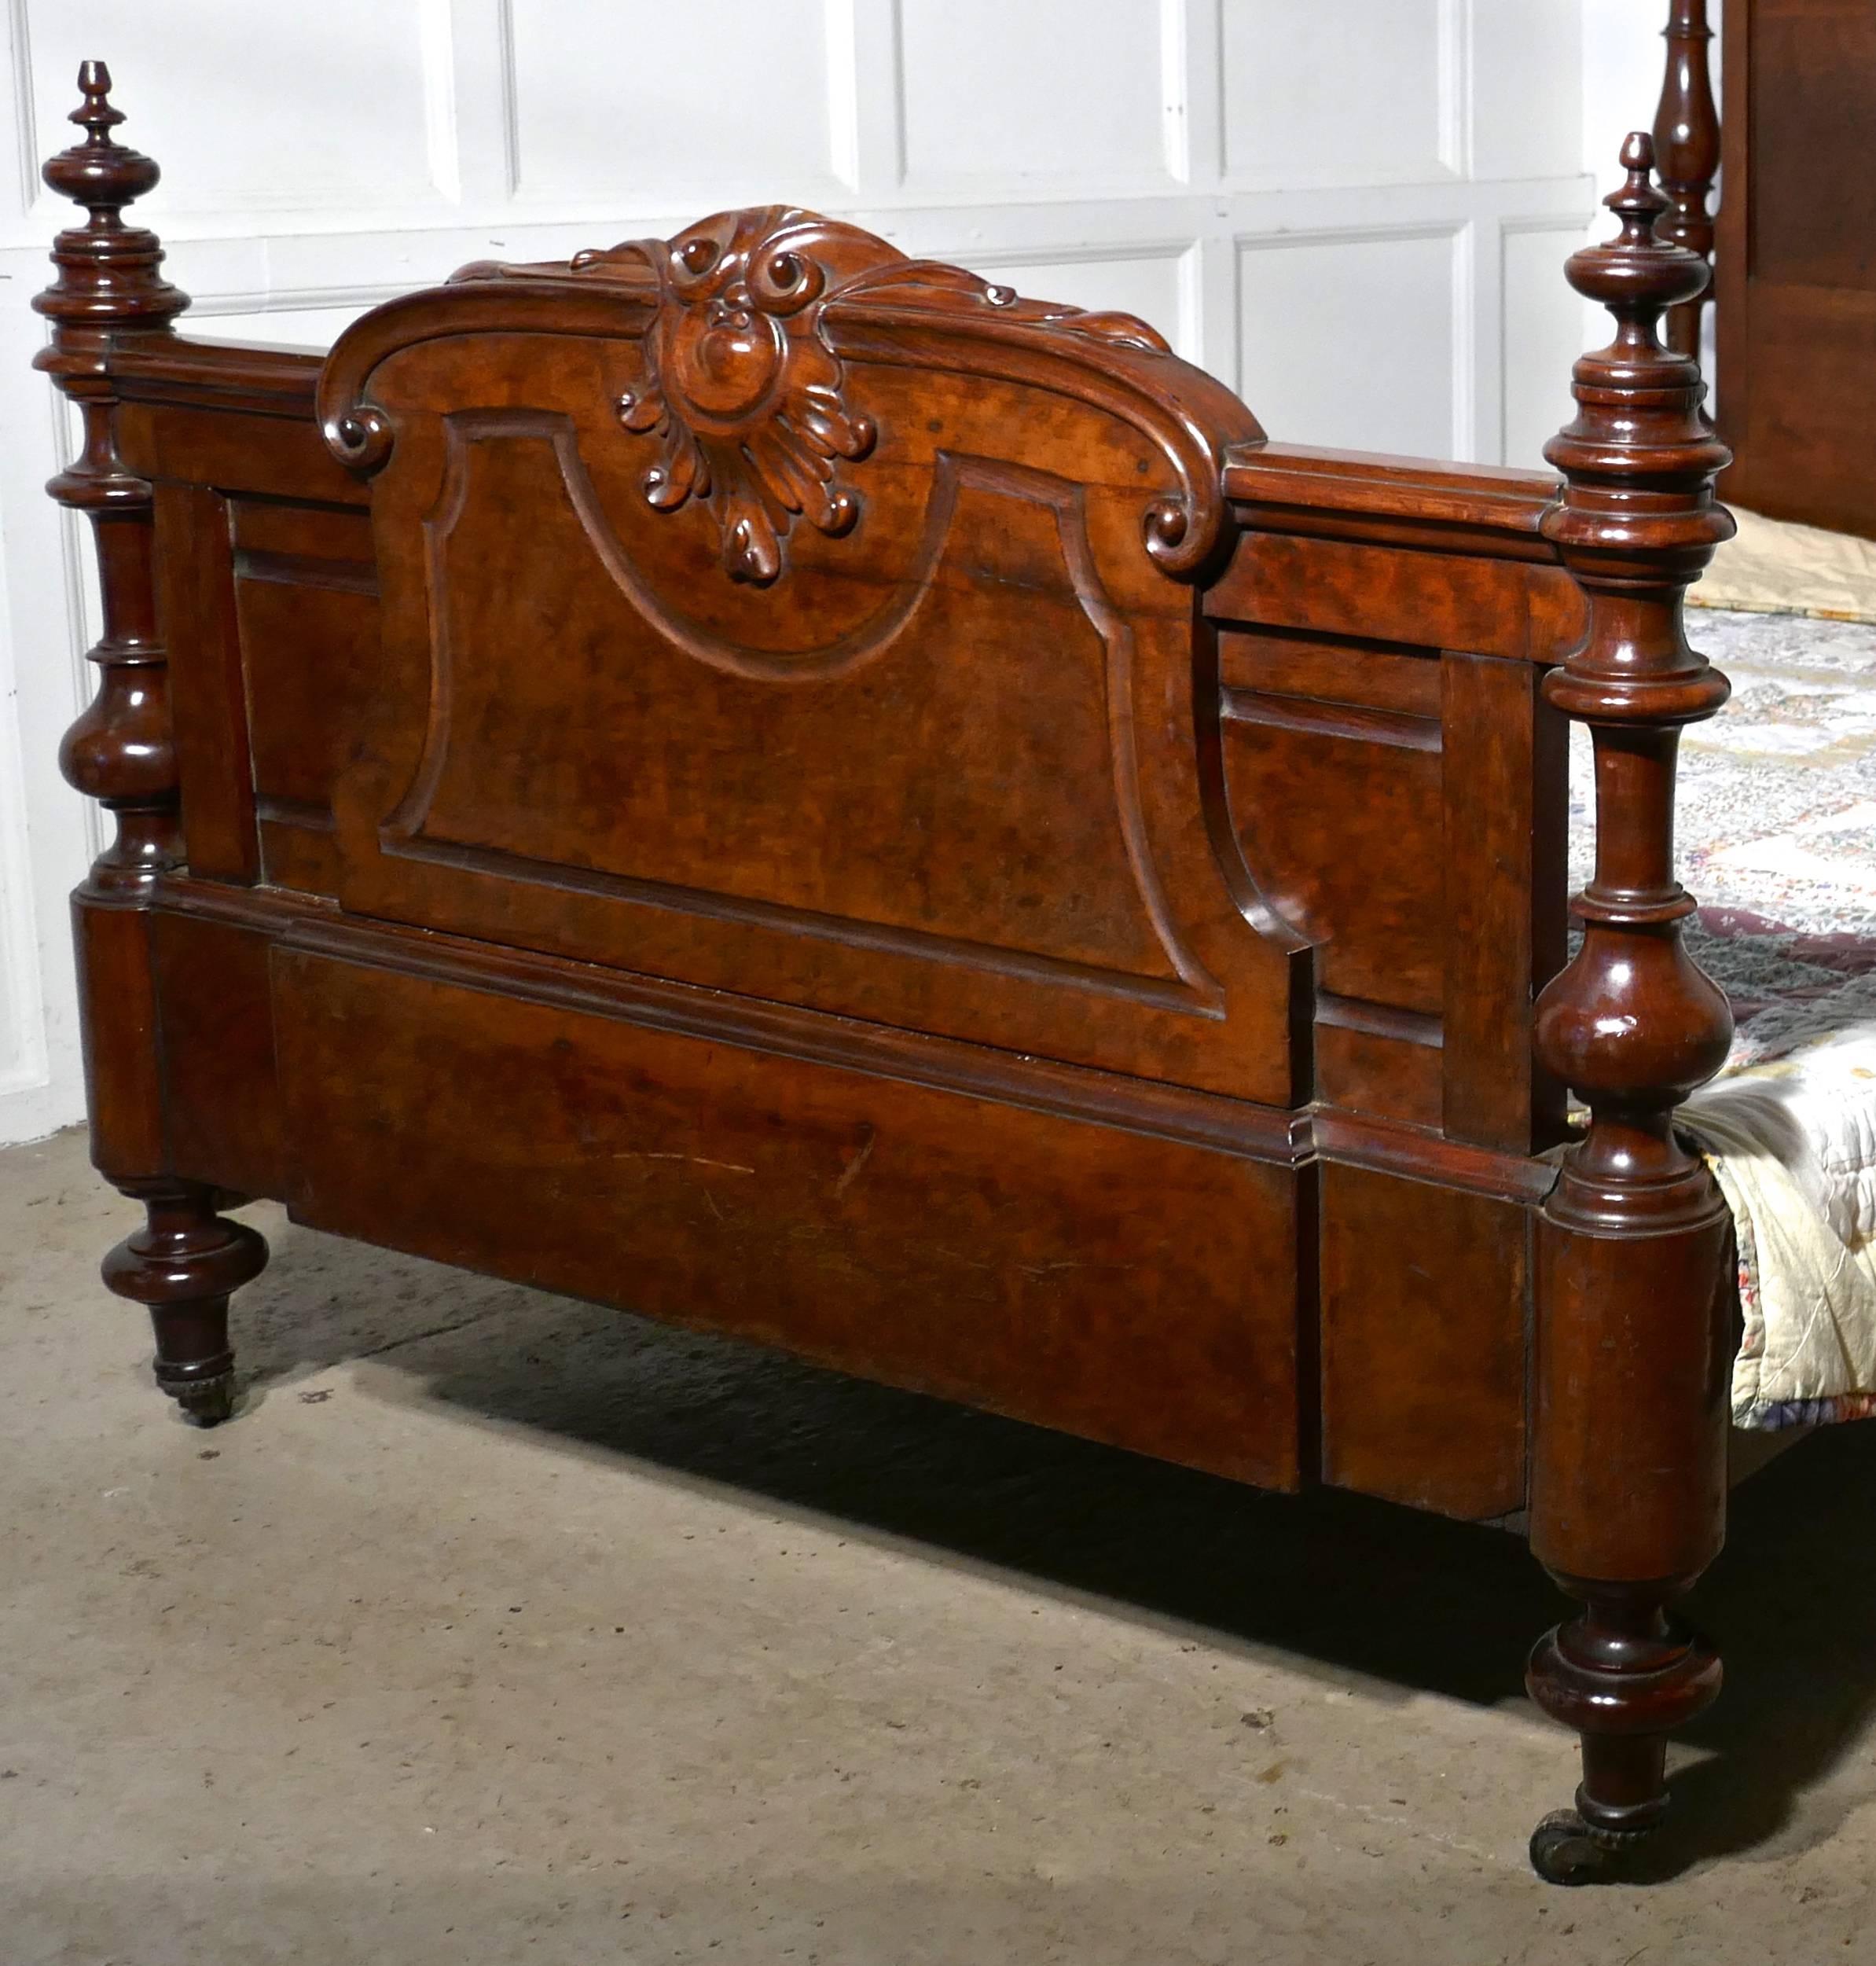 This Bed is a stunning piece with its high headboard and decorative foot end. 
The head board has a large armorial shield in the centre and on either side it has superbly turned uprights with very large carved and turned wooden finials

The foot